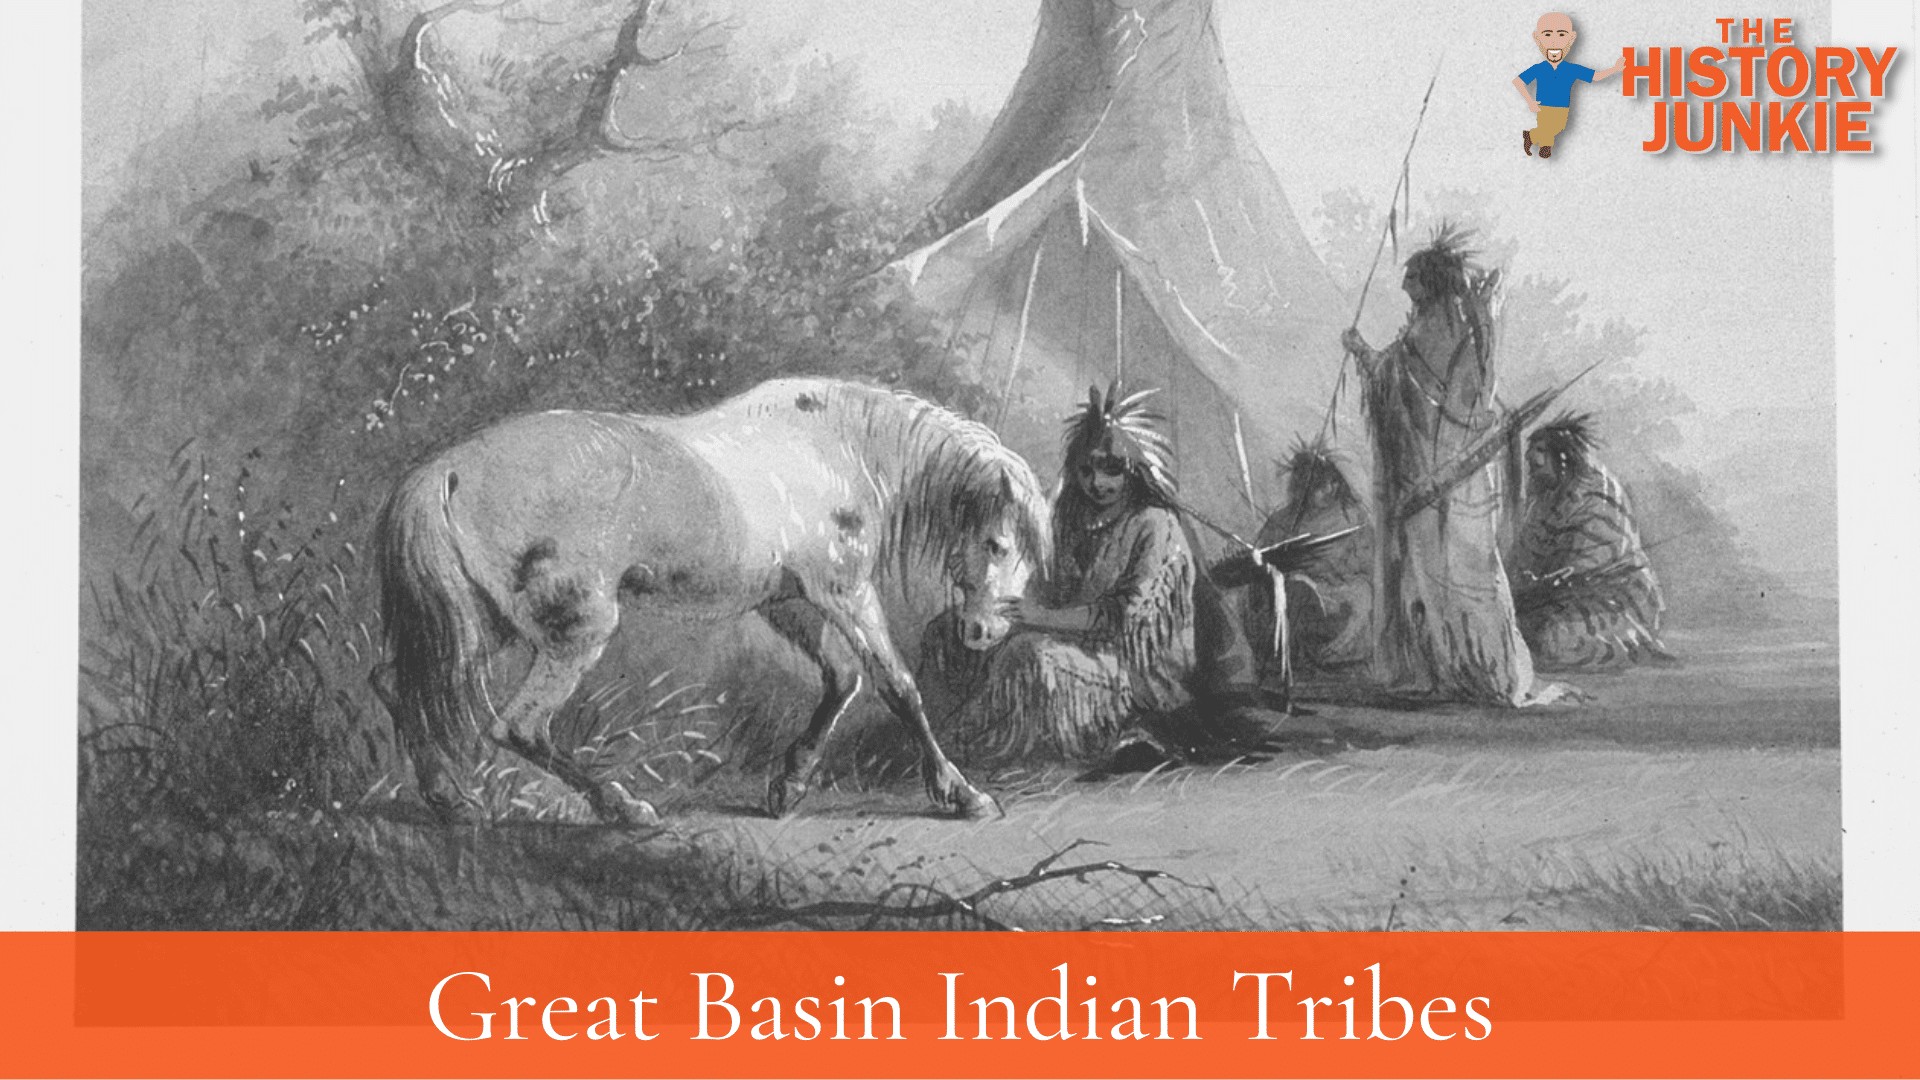 Great Basin Indian Tribes The History Junkie